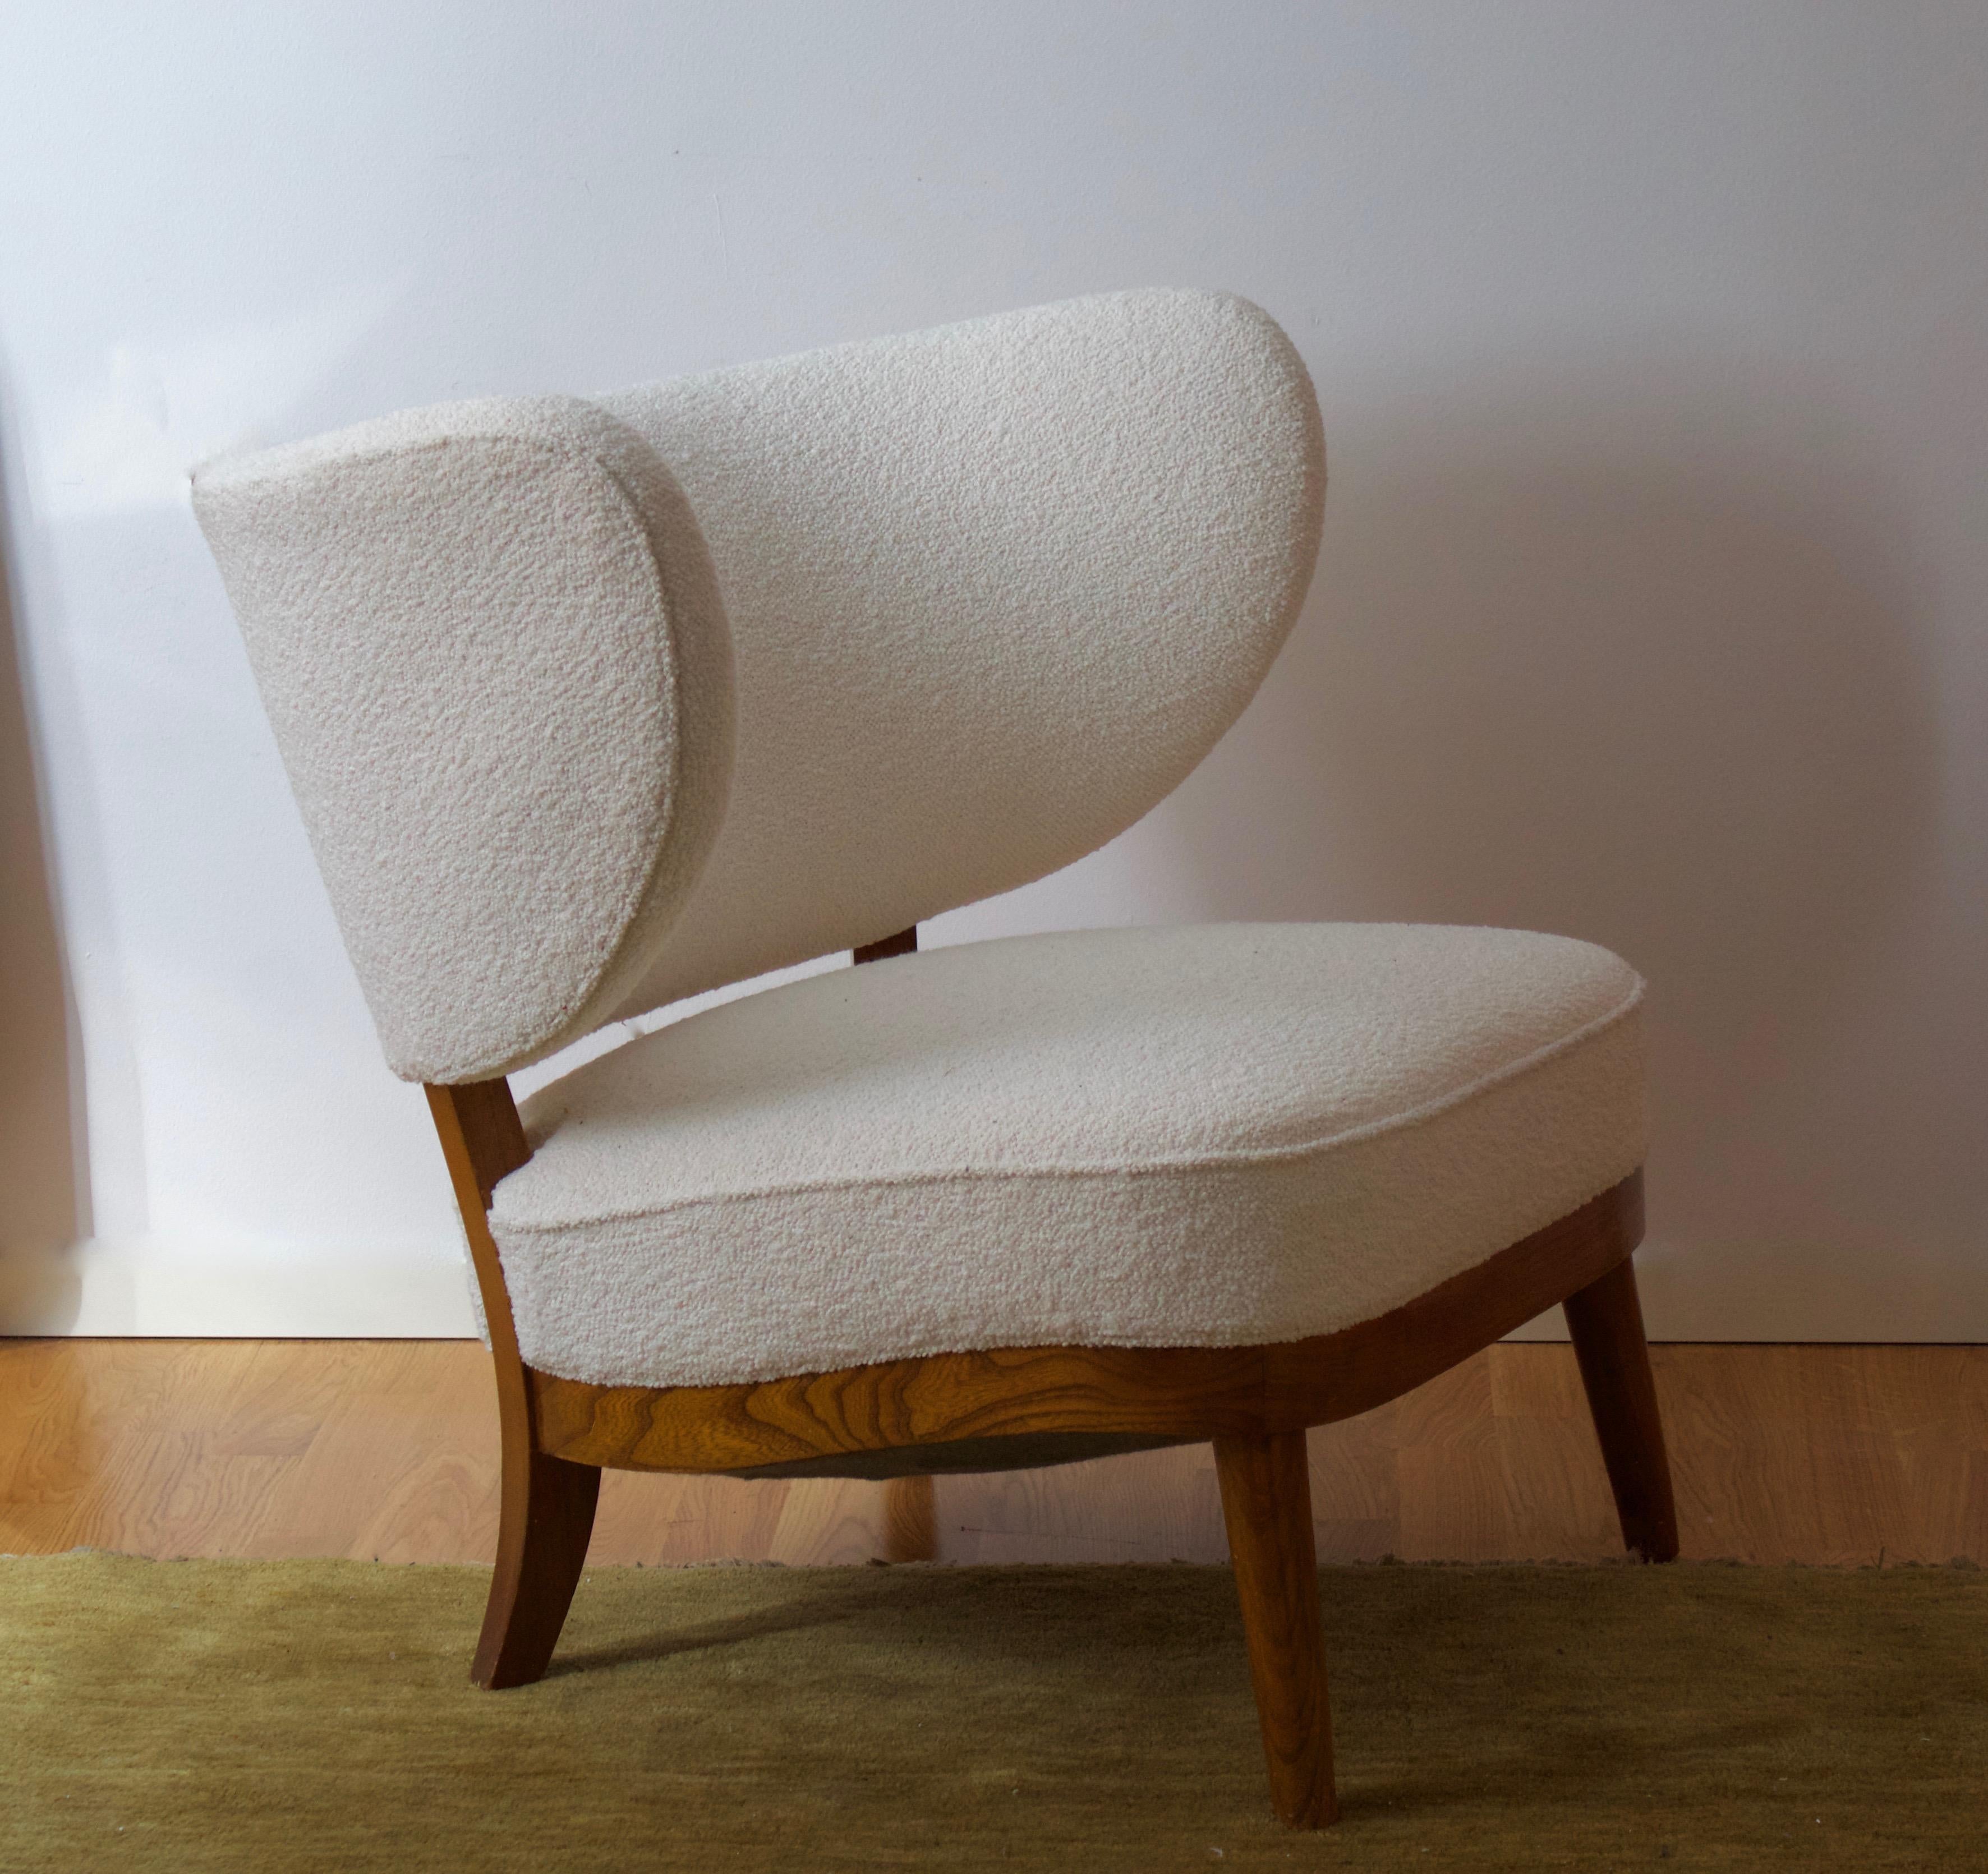 An organic lounge chair /slipper chair by Otto Schulz, manufactured by Boet, Göteborg, Sweden 1940s. Reupholstered in brand new high-end fabric sourced in Sweden.  

Other designers working in the organic style include Flemming Lassen, Philip